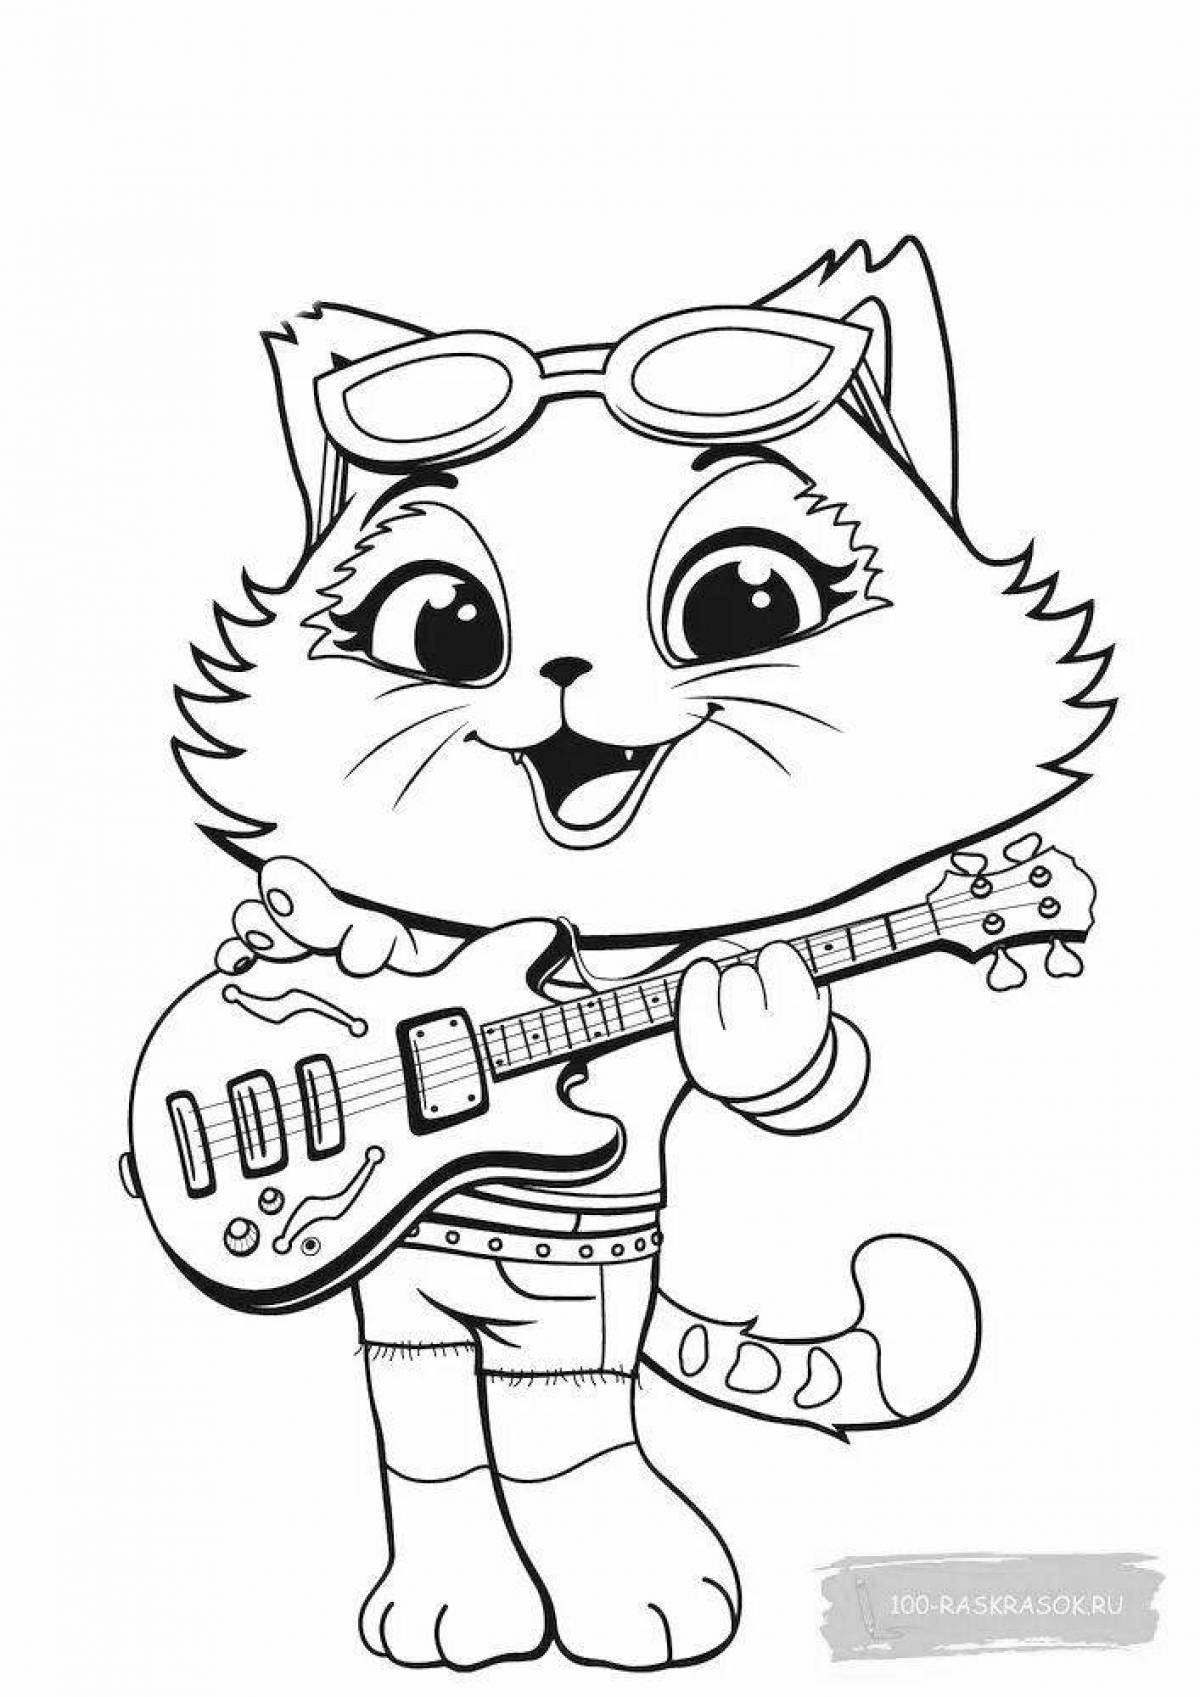 Gorgeous meow coloring page